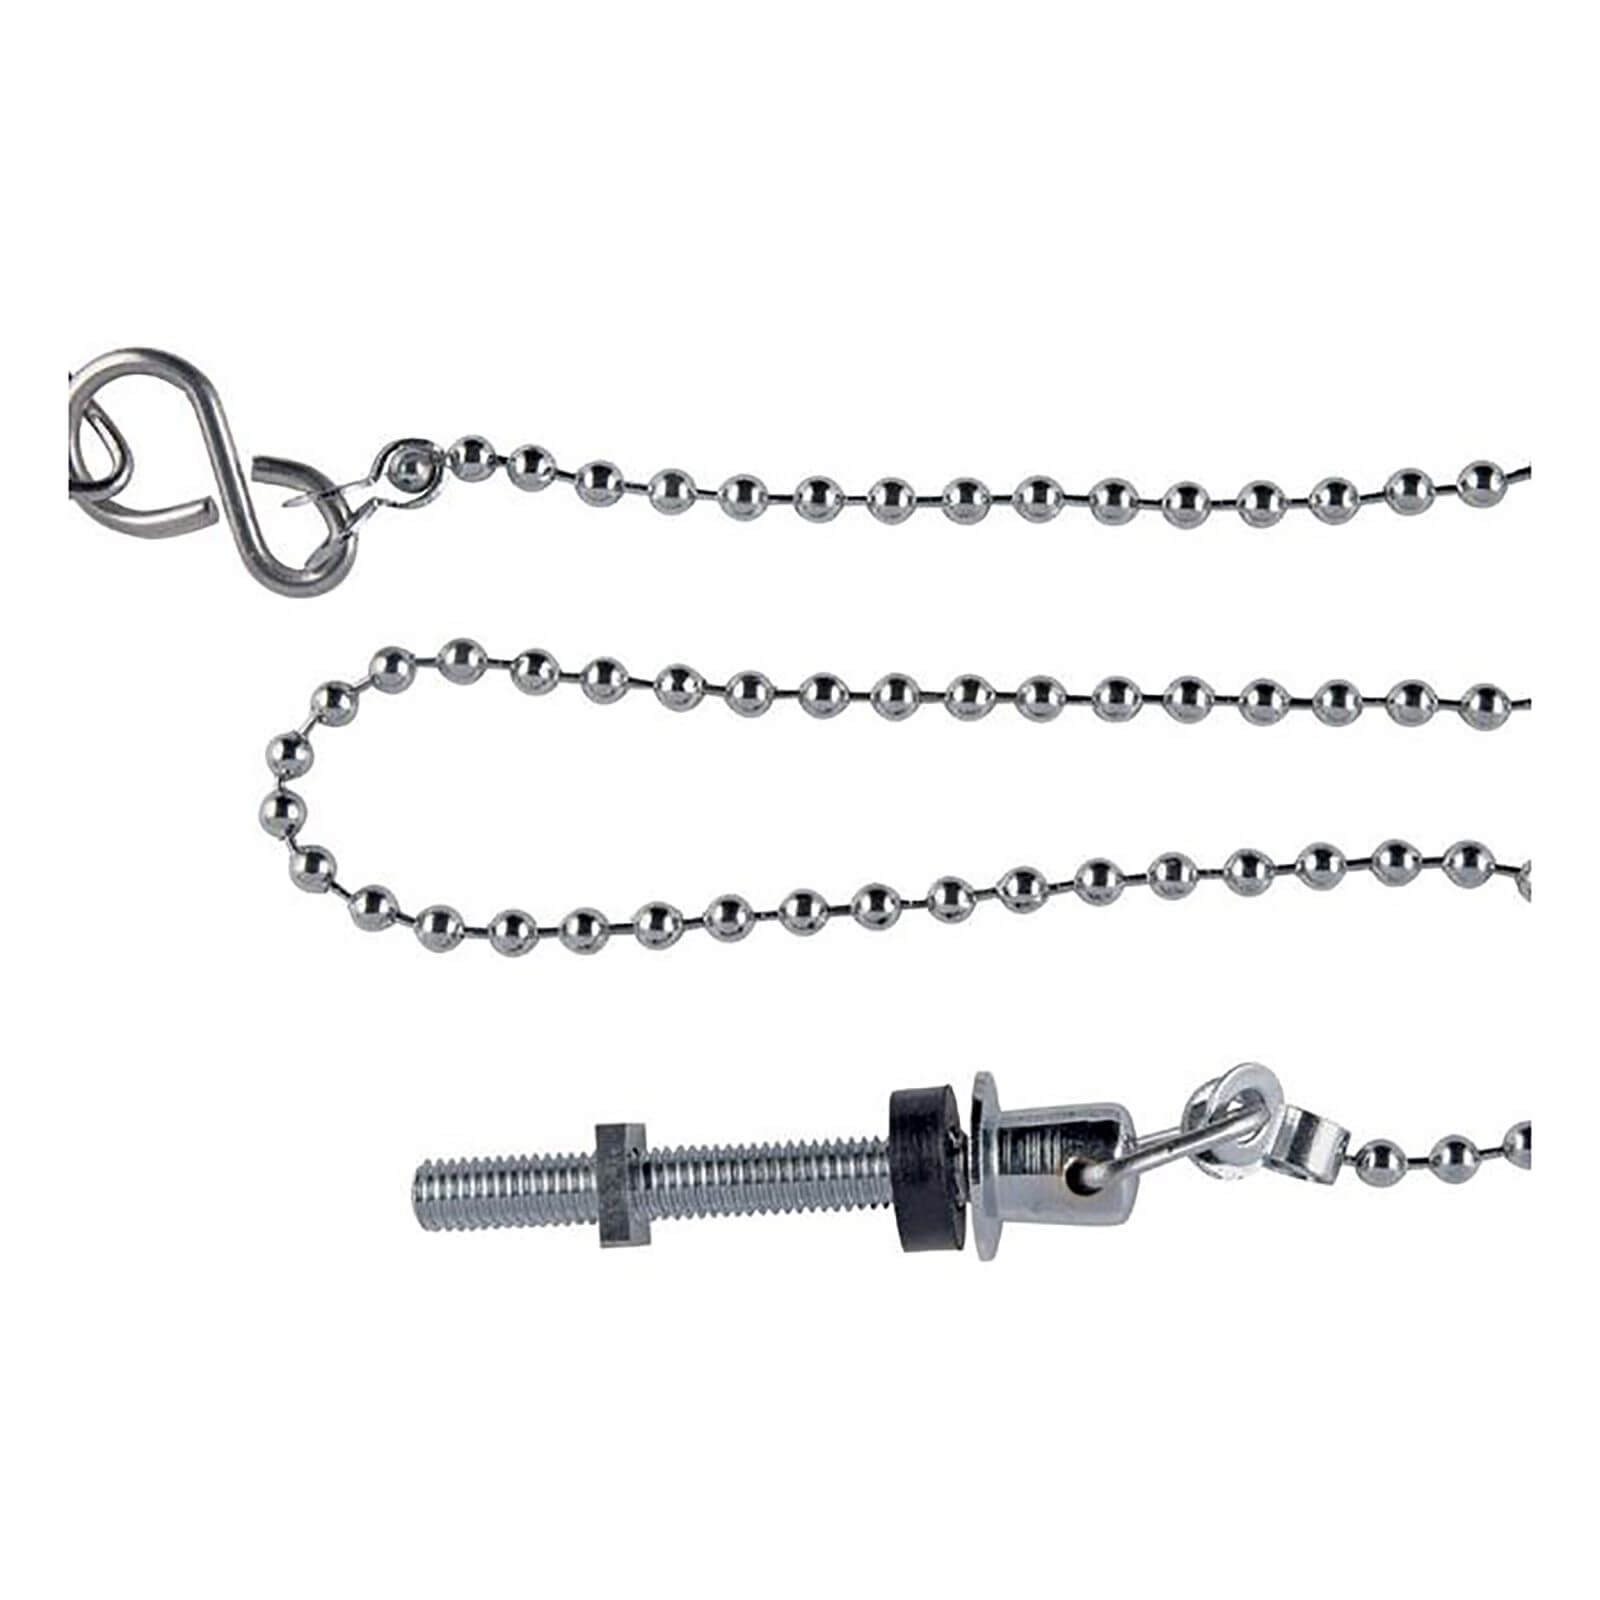 Sink Chain and Stay - 12 Inch Chrome Chain